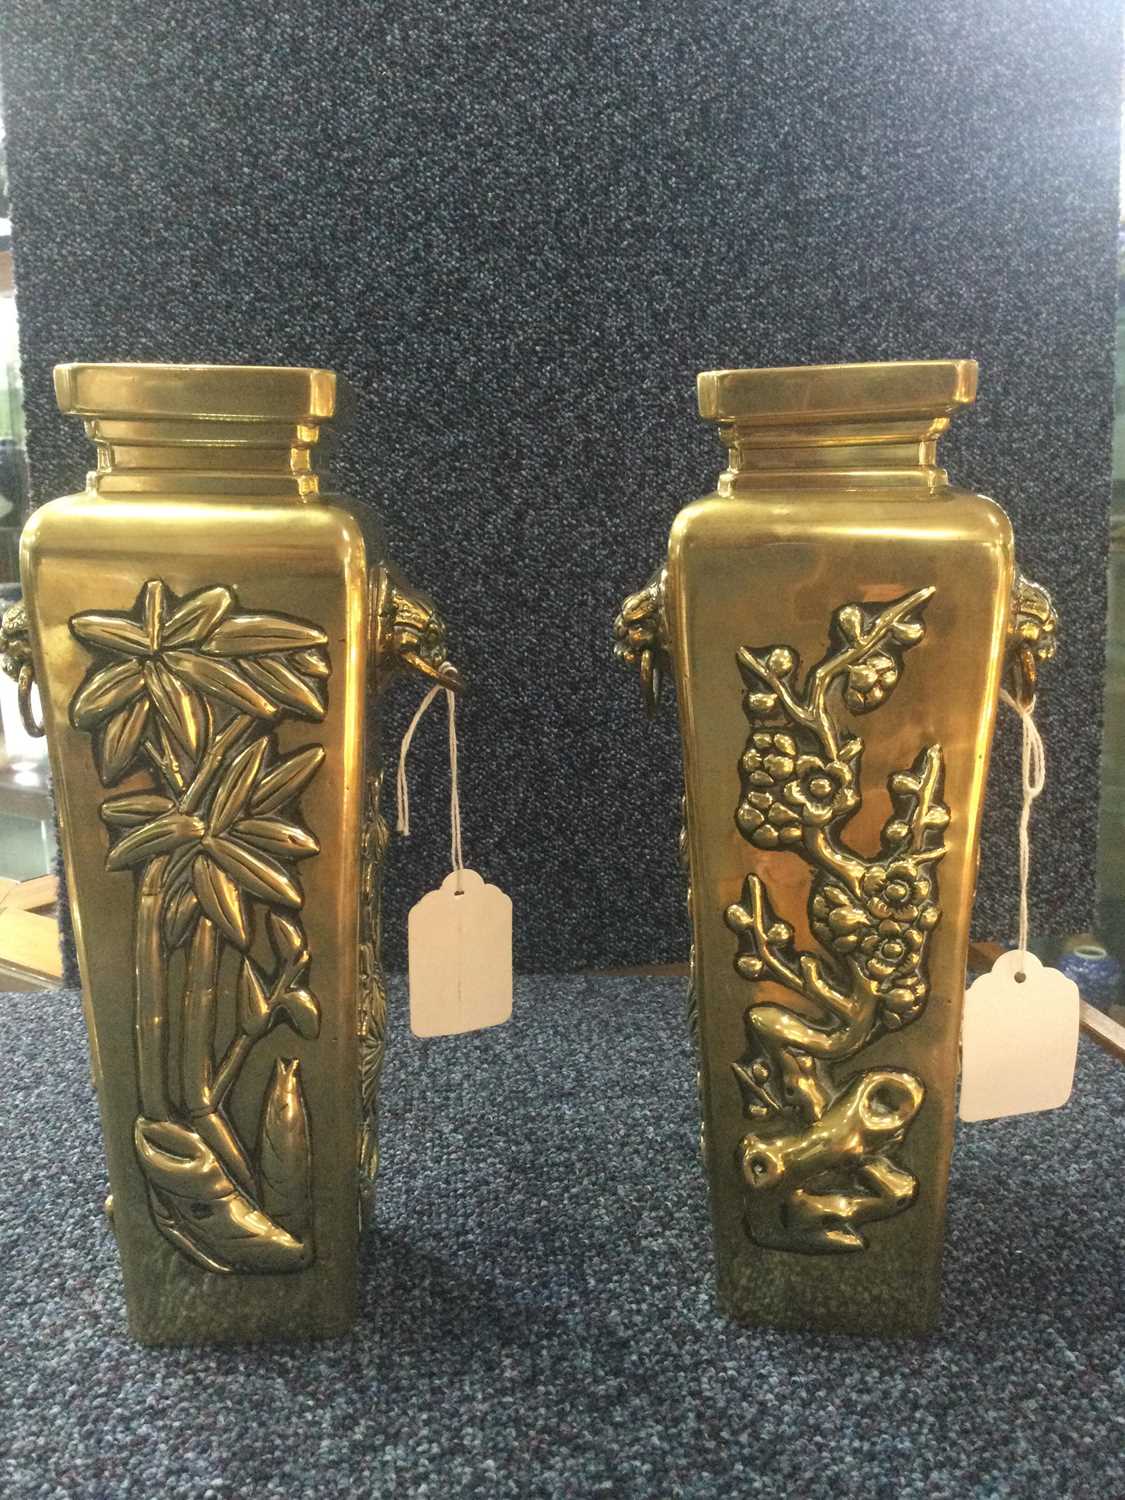 PAIR OF CHINESE BRASS VASES, EARLY 20TH CENTURY - Image 5 of 8